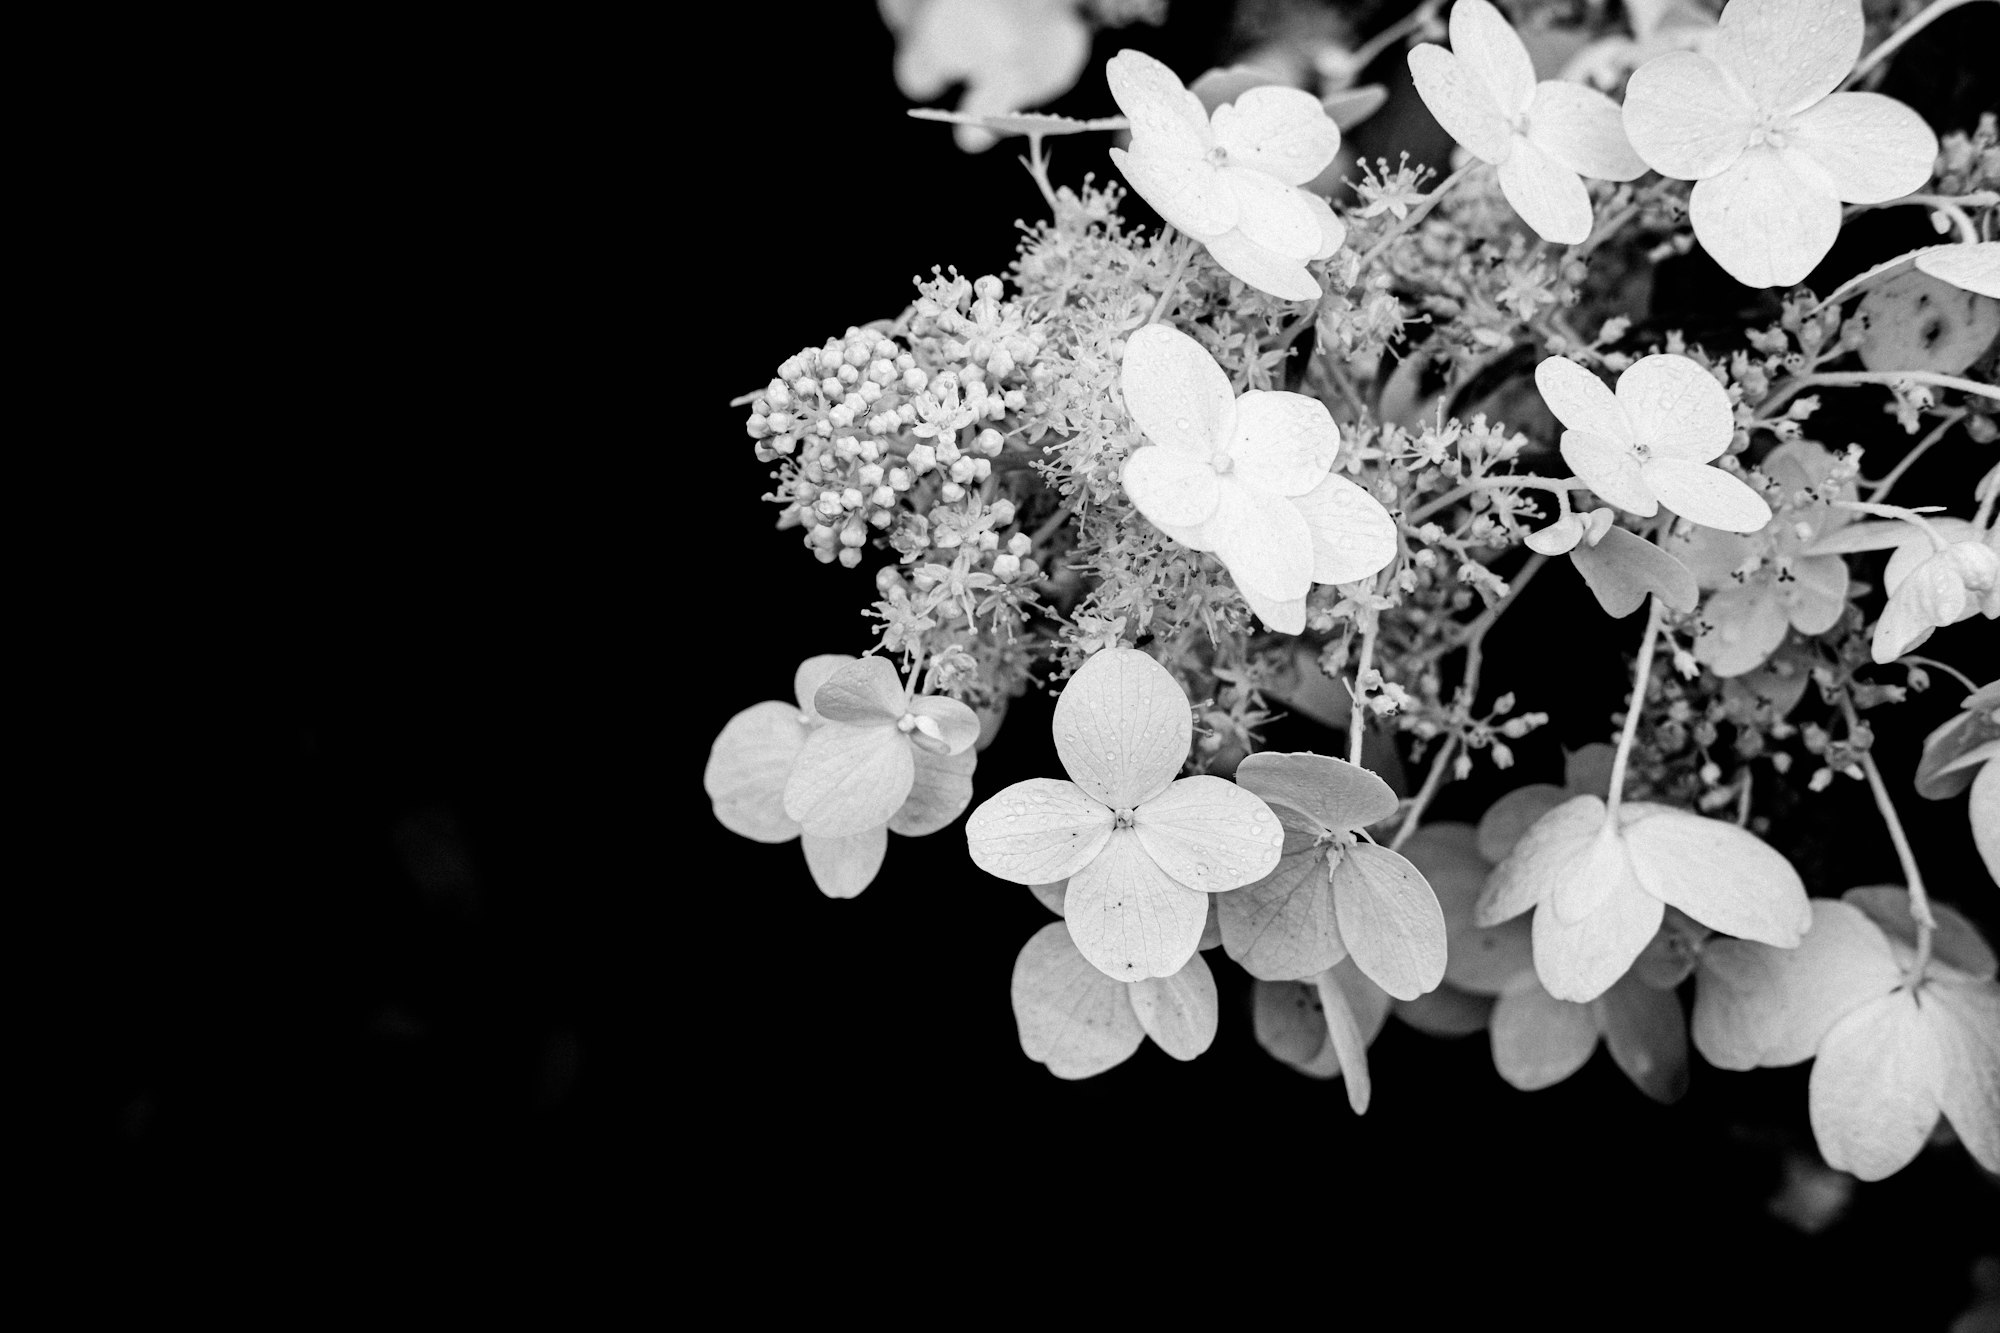 Black and white image of hydrangea flowers.